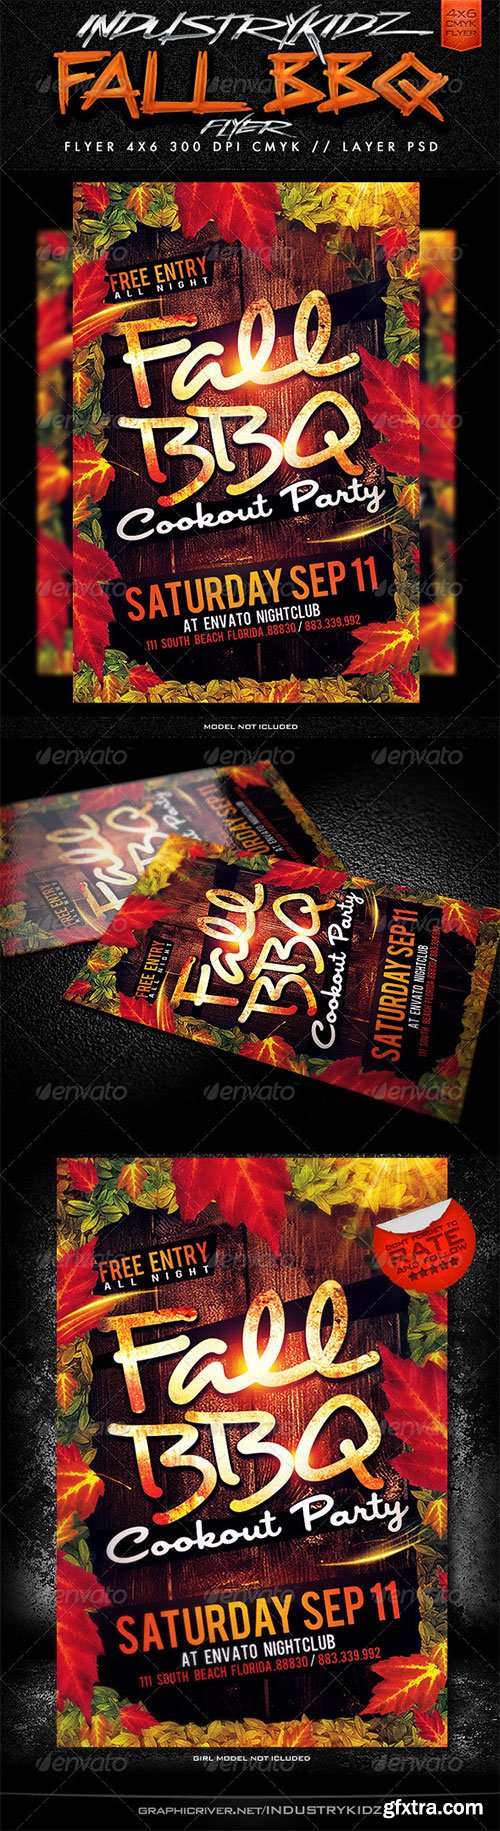 GraphicRiver - Fall BBQ Flyer Template